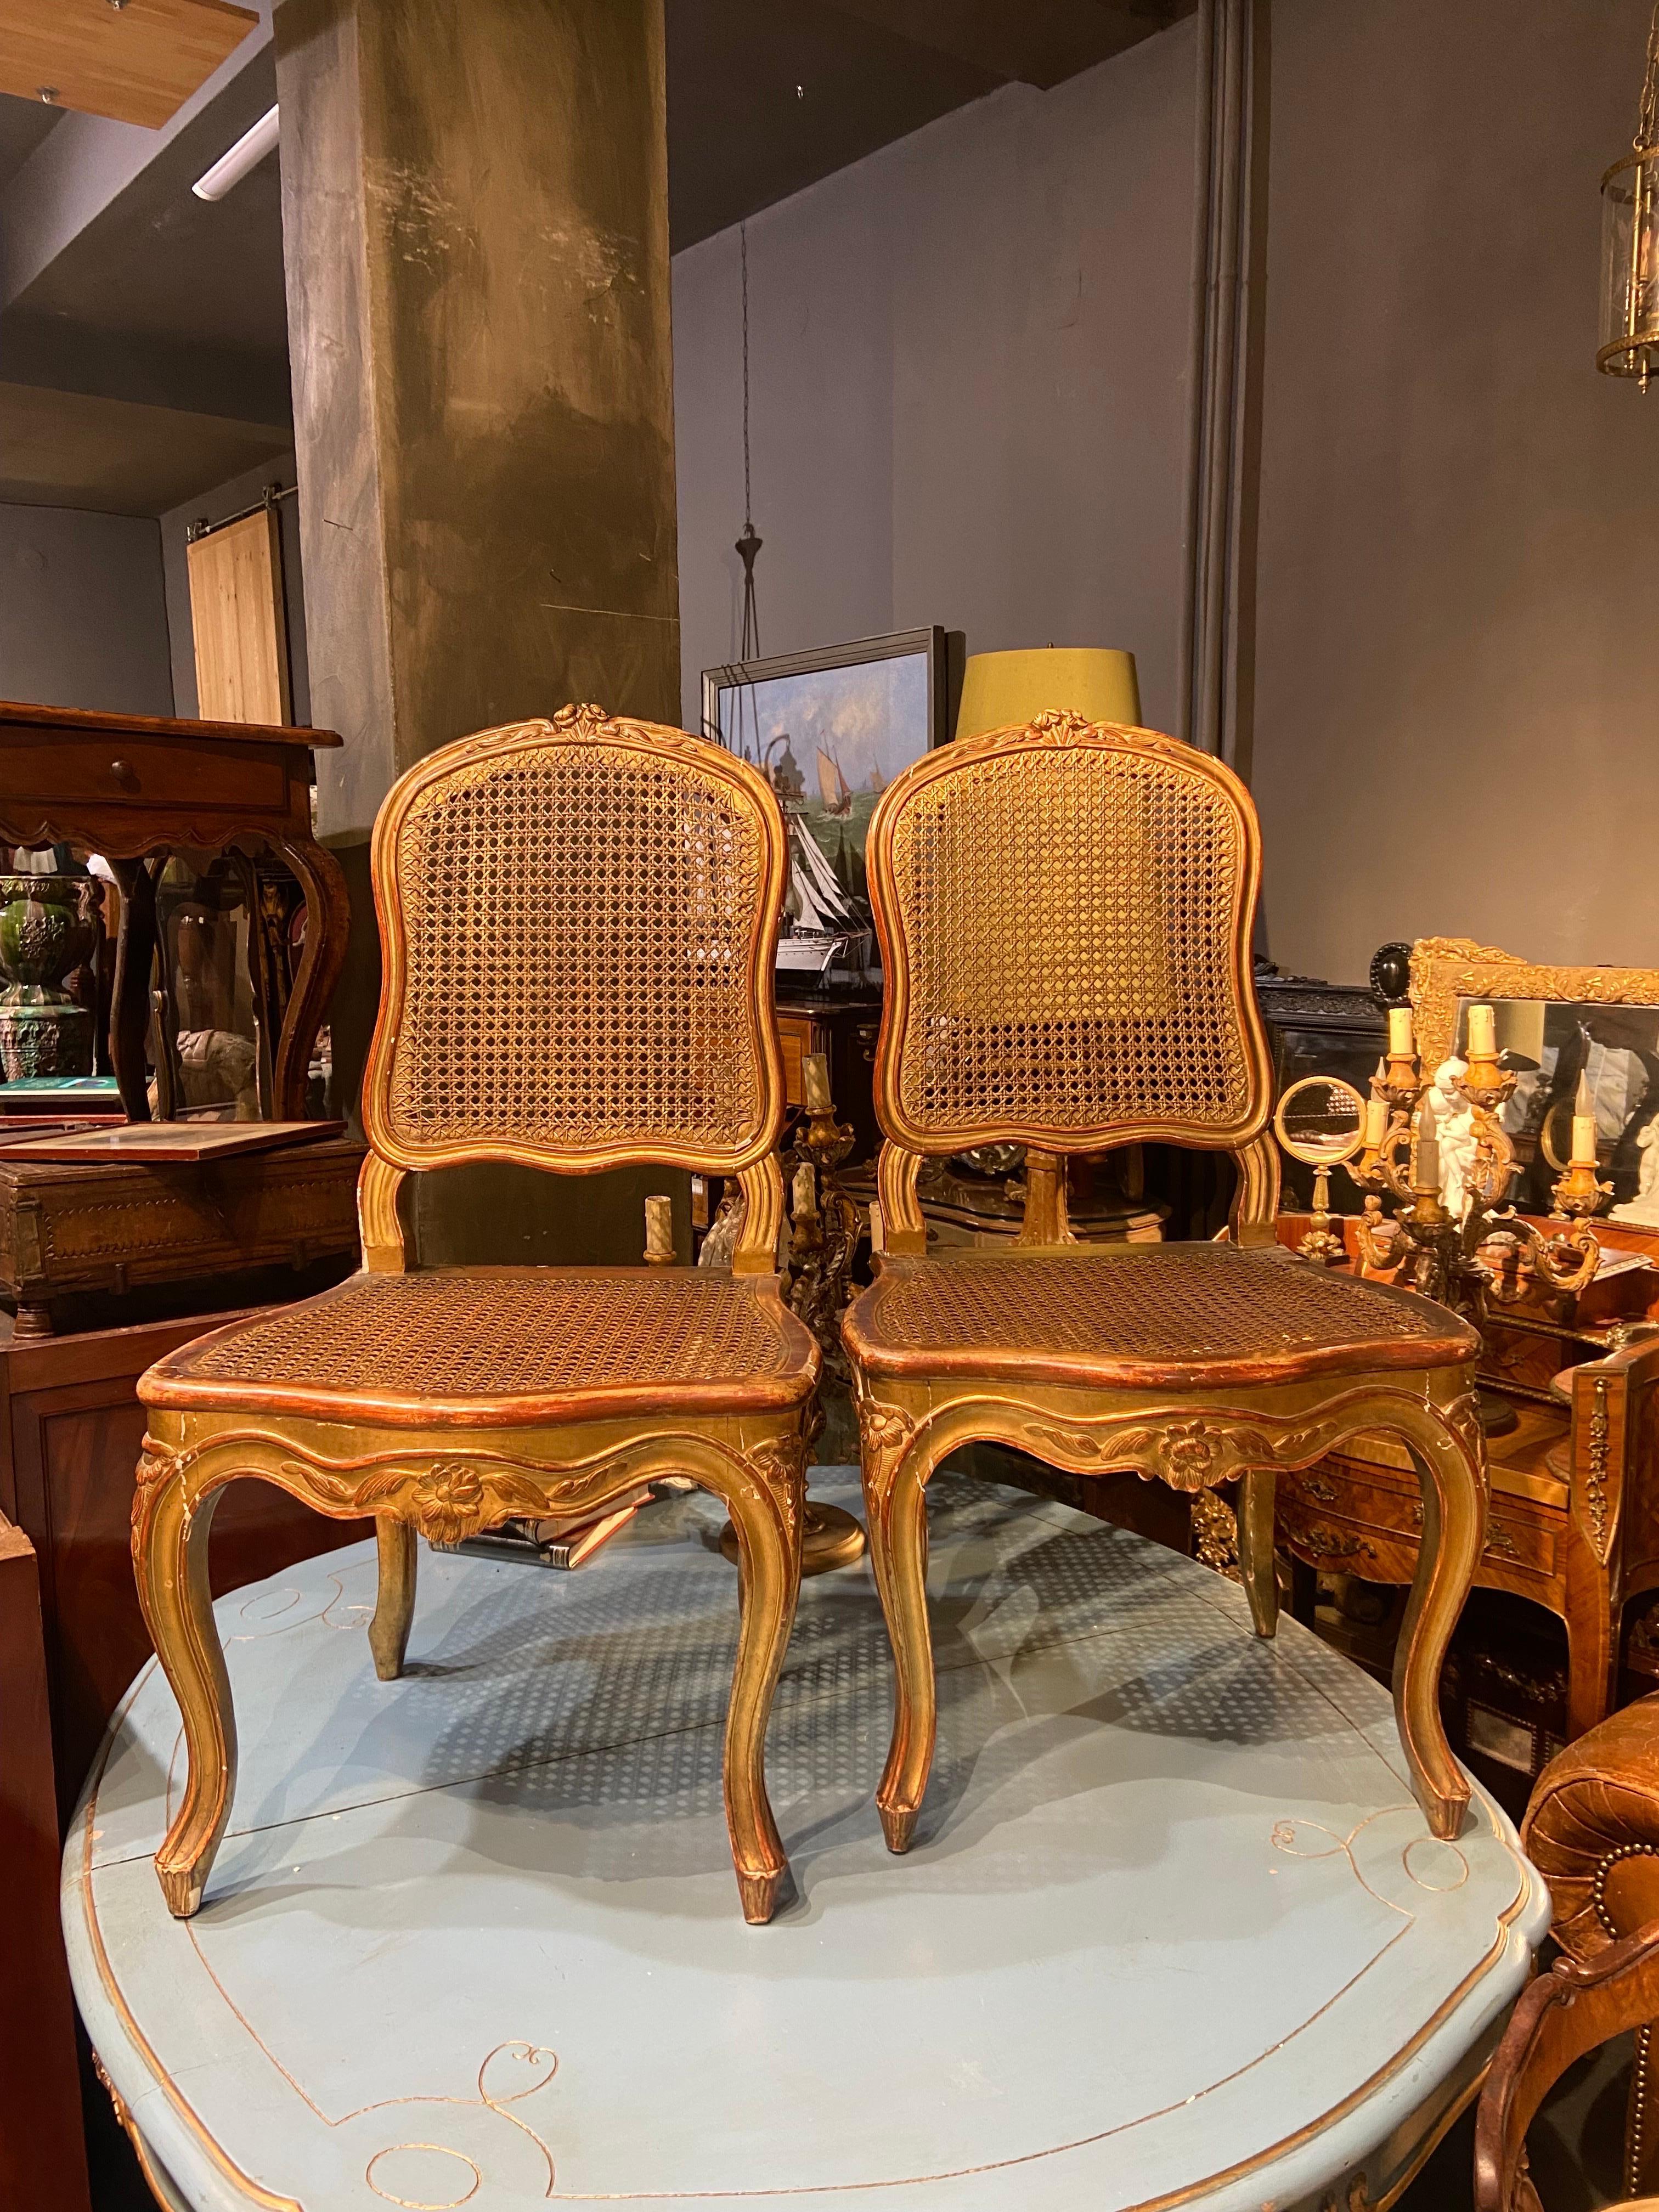 19th Century French hand carved walnut chairs in gilt wood, that have cane seats and backs. Very good original condition with no restorations made.
France, circa 1870.